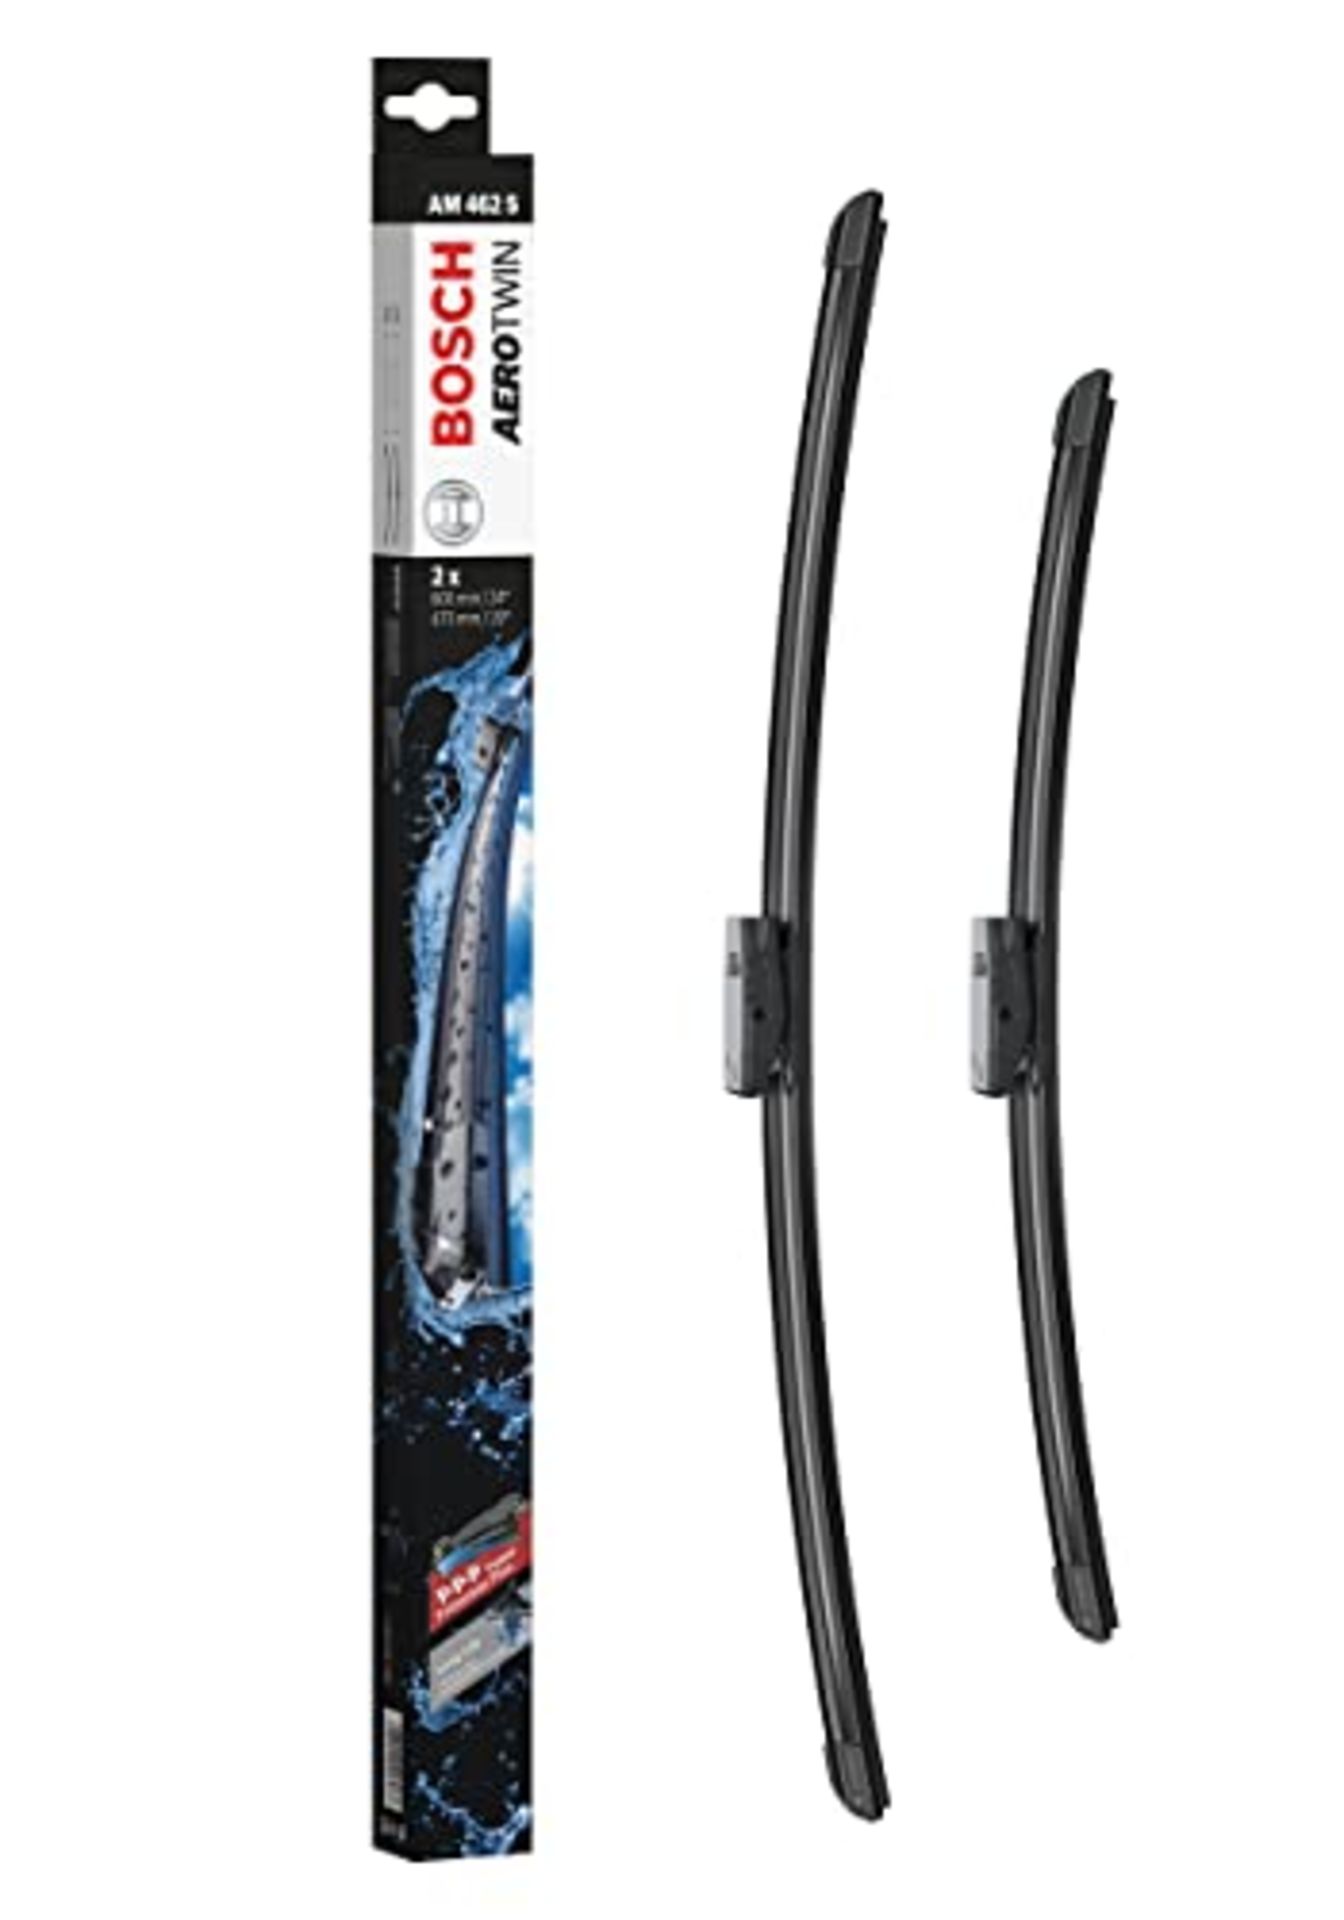 Bosch Wiper Blade Aerotwin AM462S, Length: 600mm/475mm - Set of Front Wiper Blades - O